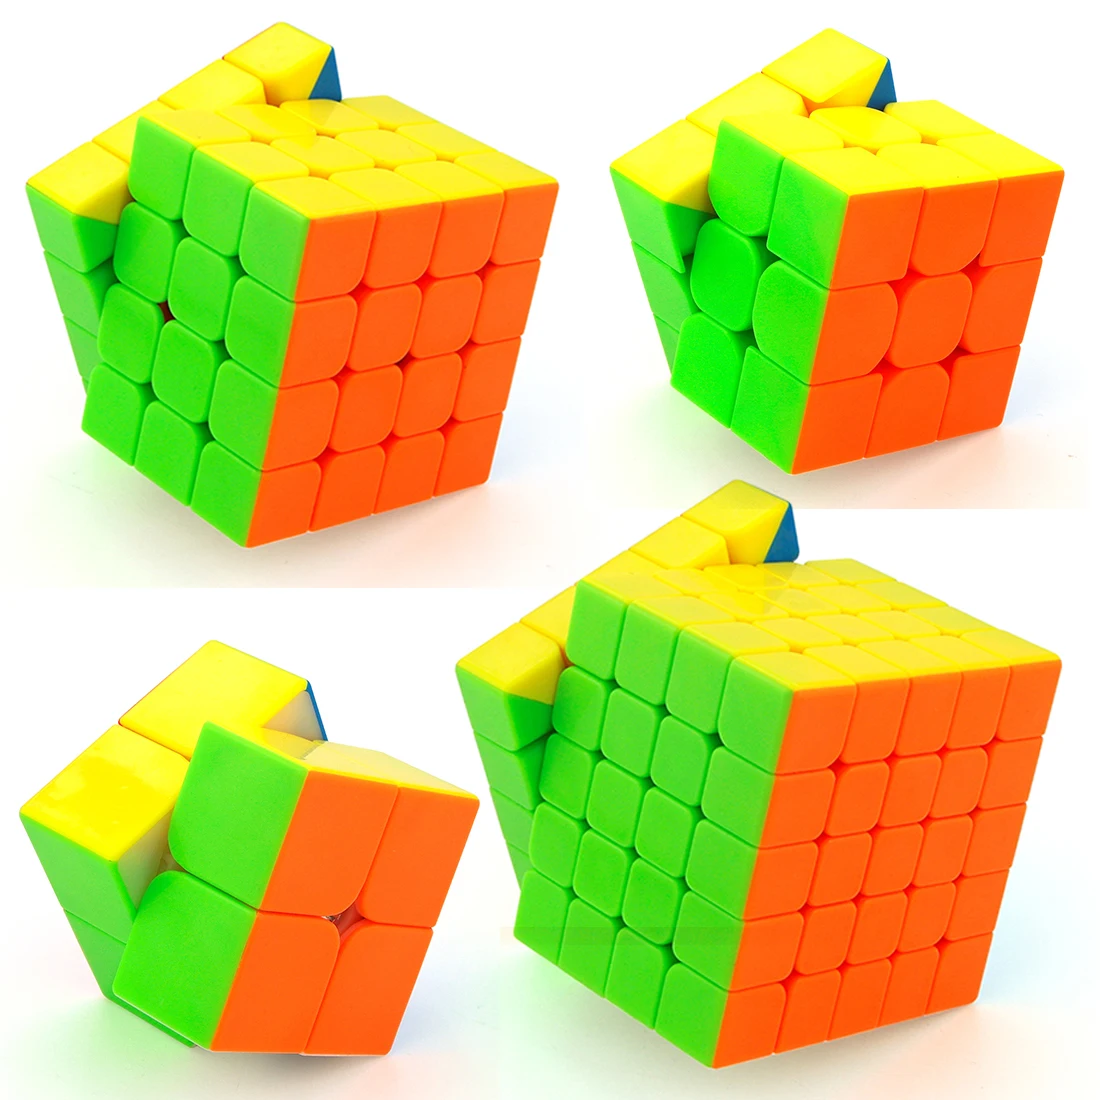 

MoYu Cubing Classroom Gift Box Package 2x2 3x3 4x4 5x5 Stickerless Magic Cube Speed Puzzle Toys For Children